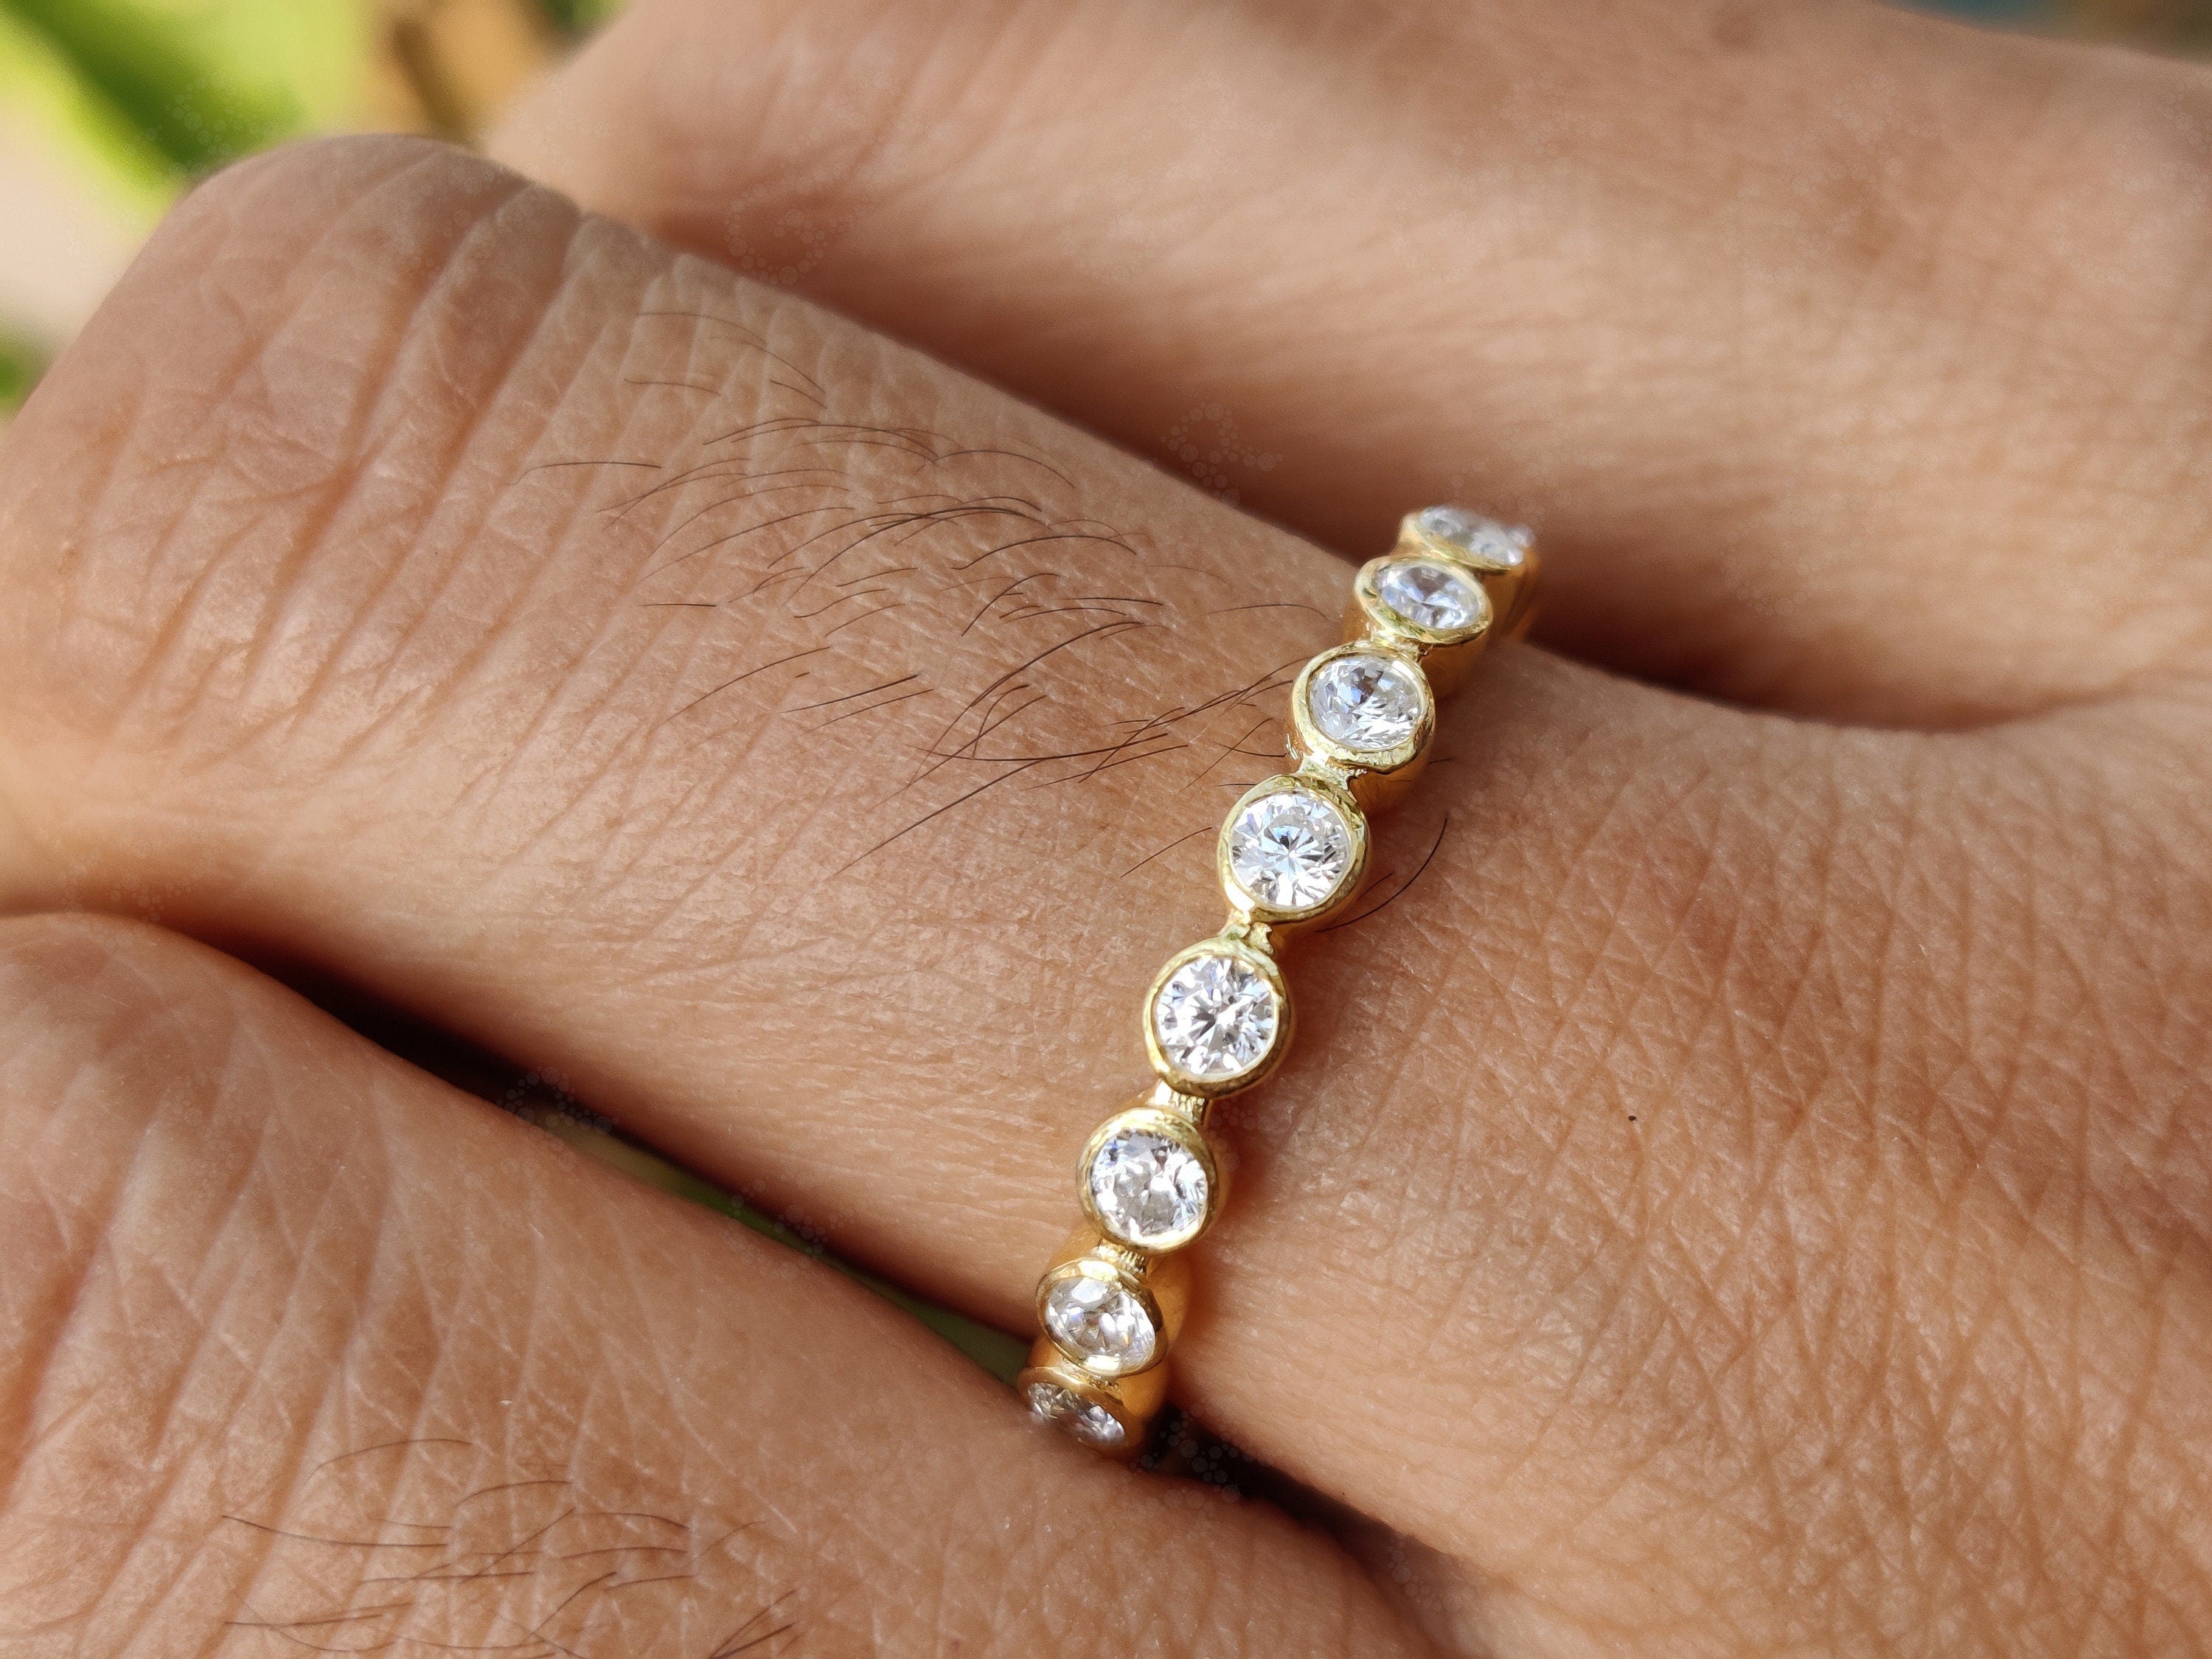 Radiate Elegance with a 2.20 mm Round Bezel Moissanite Women's Wedding Band – Available in Silver and Gold. Elevate Your Style with a Full Eternity Brilliant Cut Moissanite Ring, Ideal for Stacking